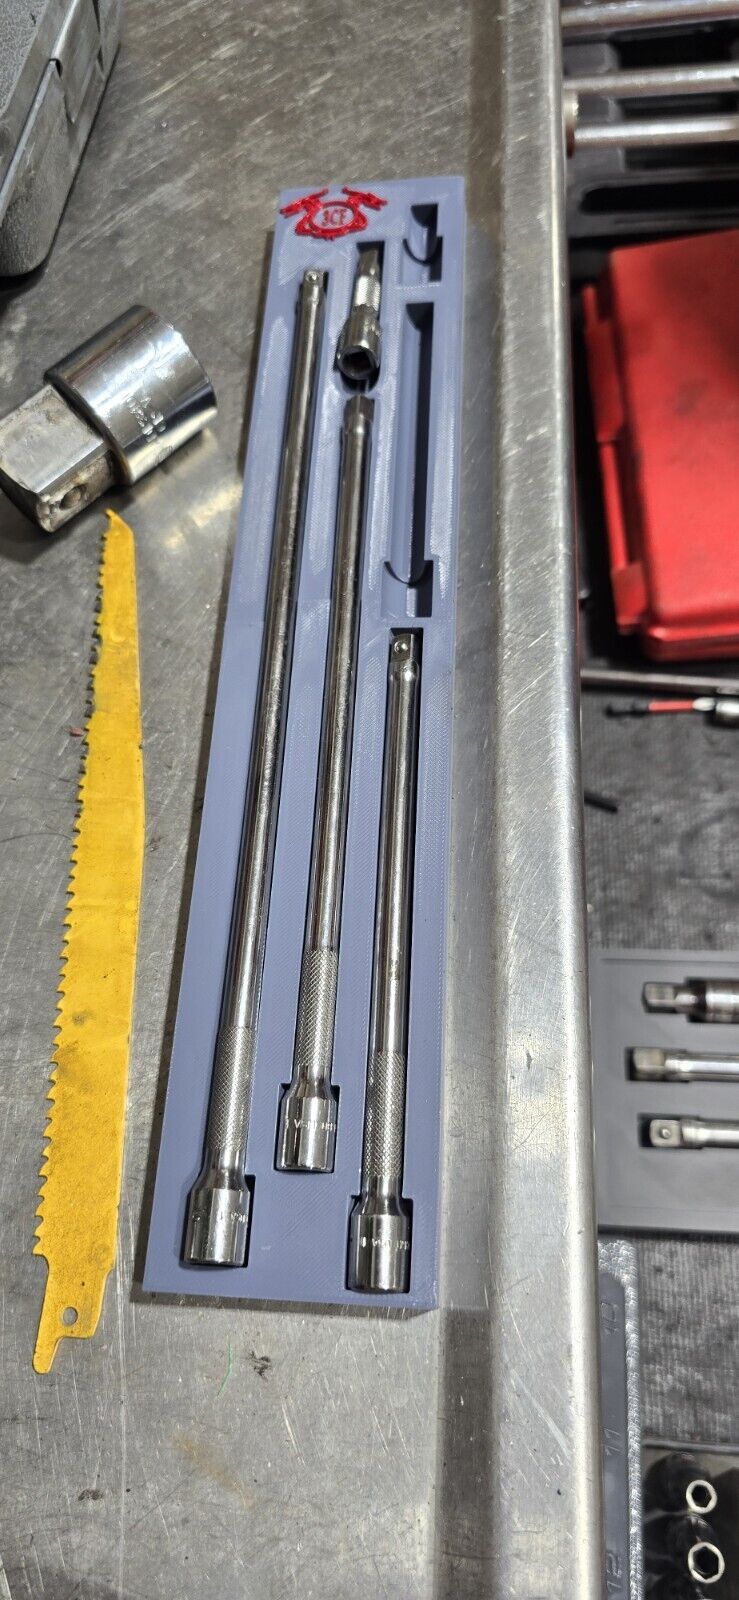 1/4 Snap On Extension Tray